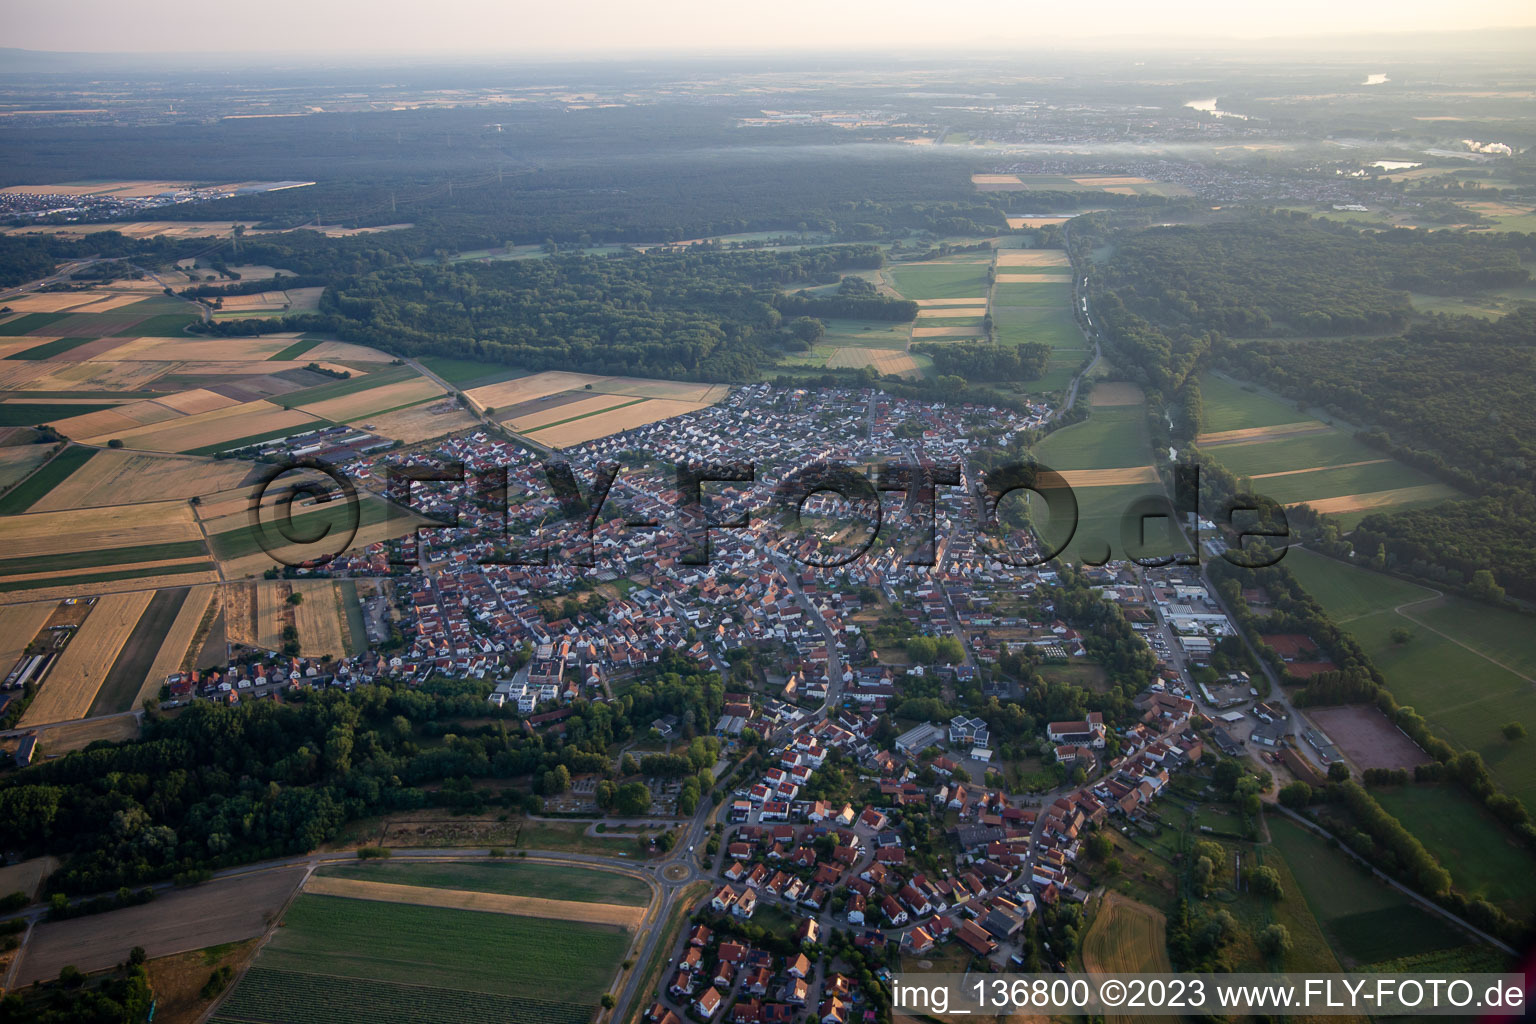 Bird's eye view of Hördt in the state Rhineland-Palatinate, Germany